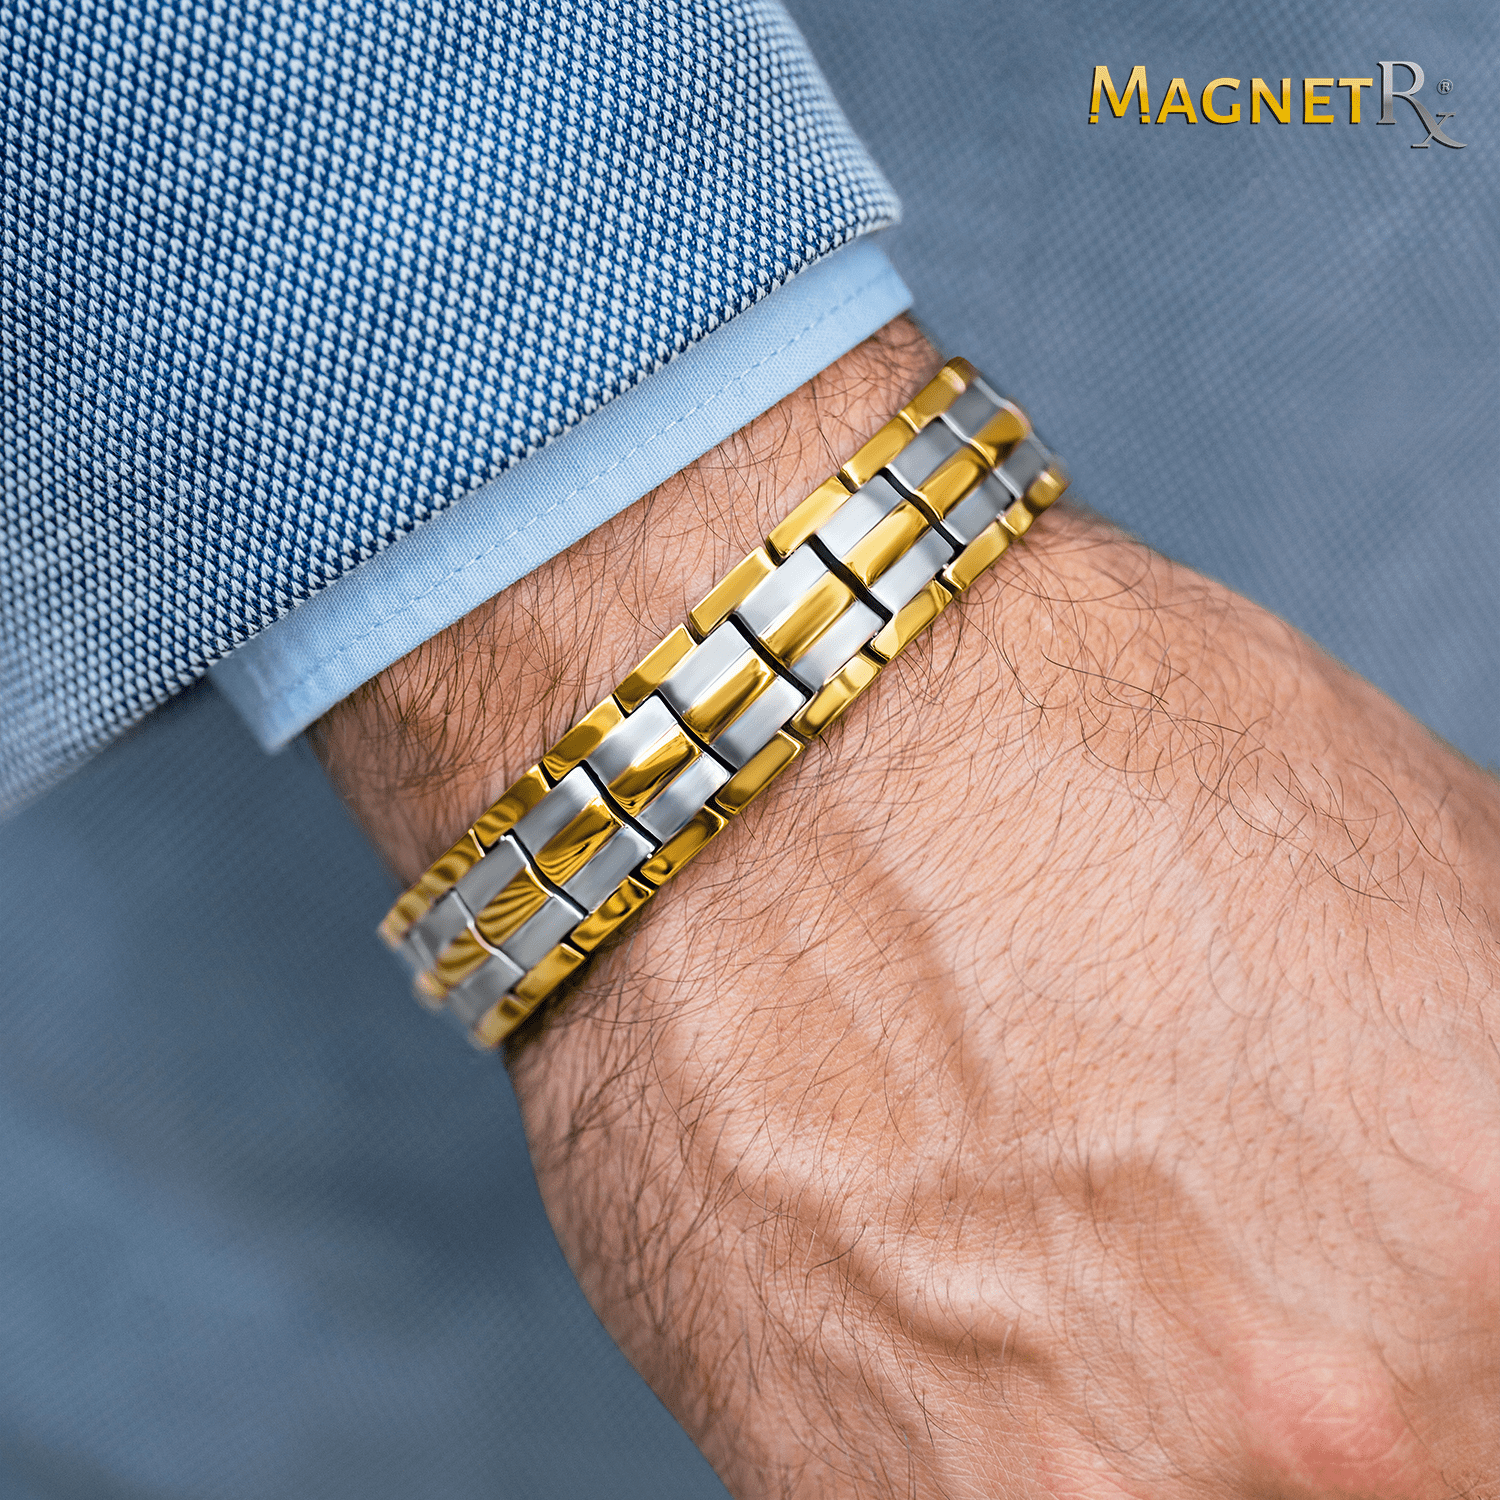 Maxim world bio magnetic breslet for men/magnetic therapy metal bracelet  titanium material : Amazon.in: Health & Personal Care